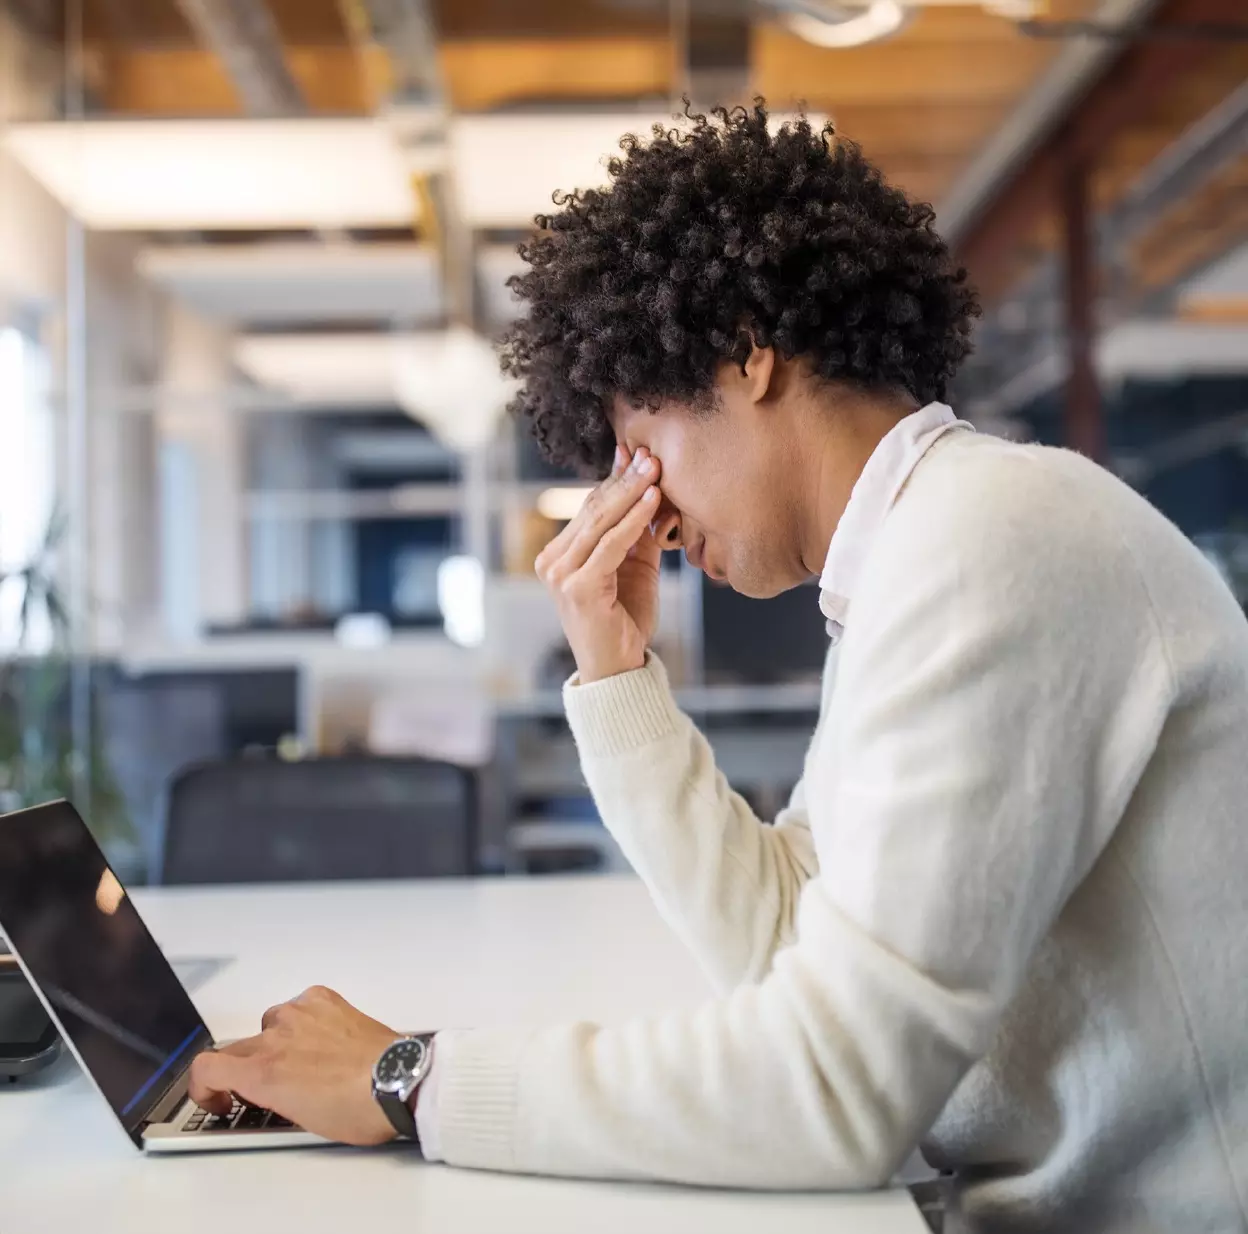 How Burnout is Affecting the Workforce